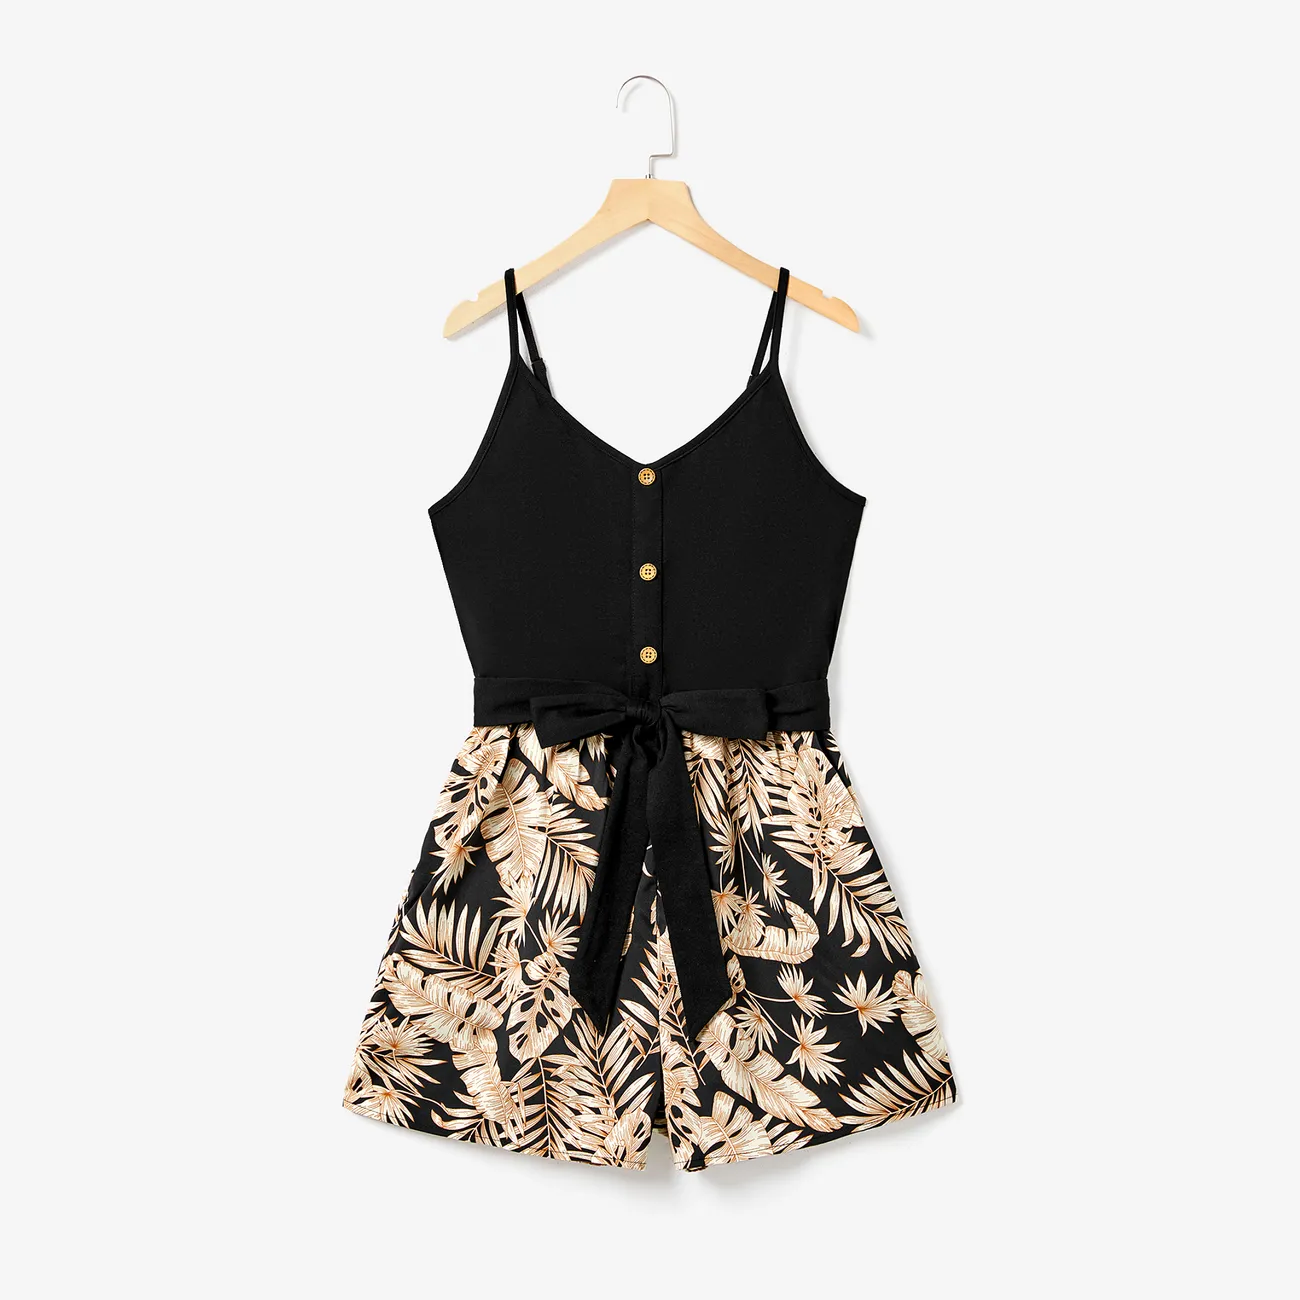 Mommy and Me Camisole Leaf Print Belted One-piece Romper with Pockets Black big image 1